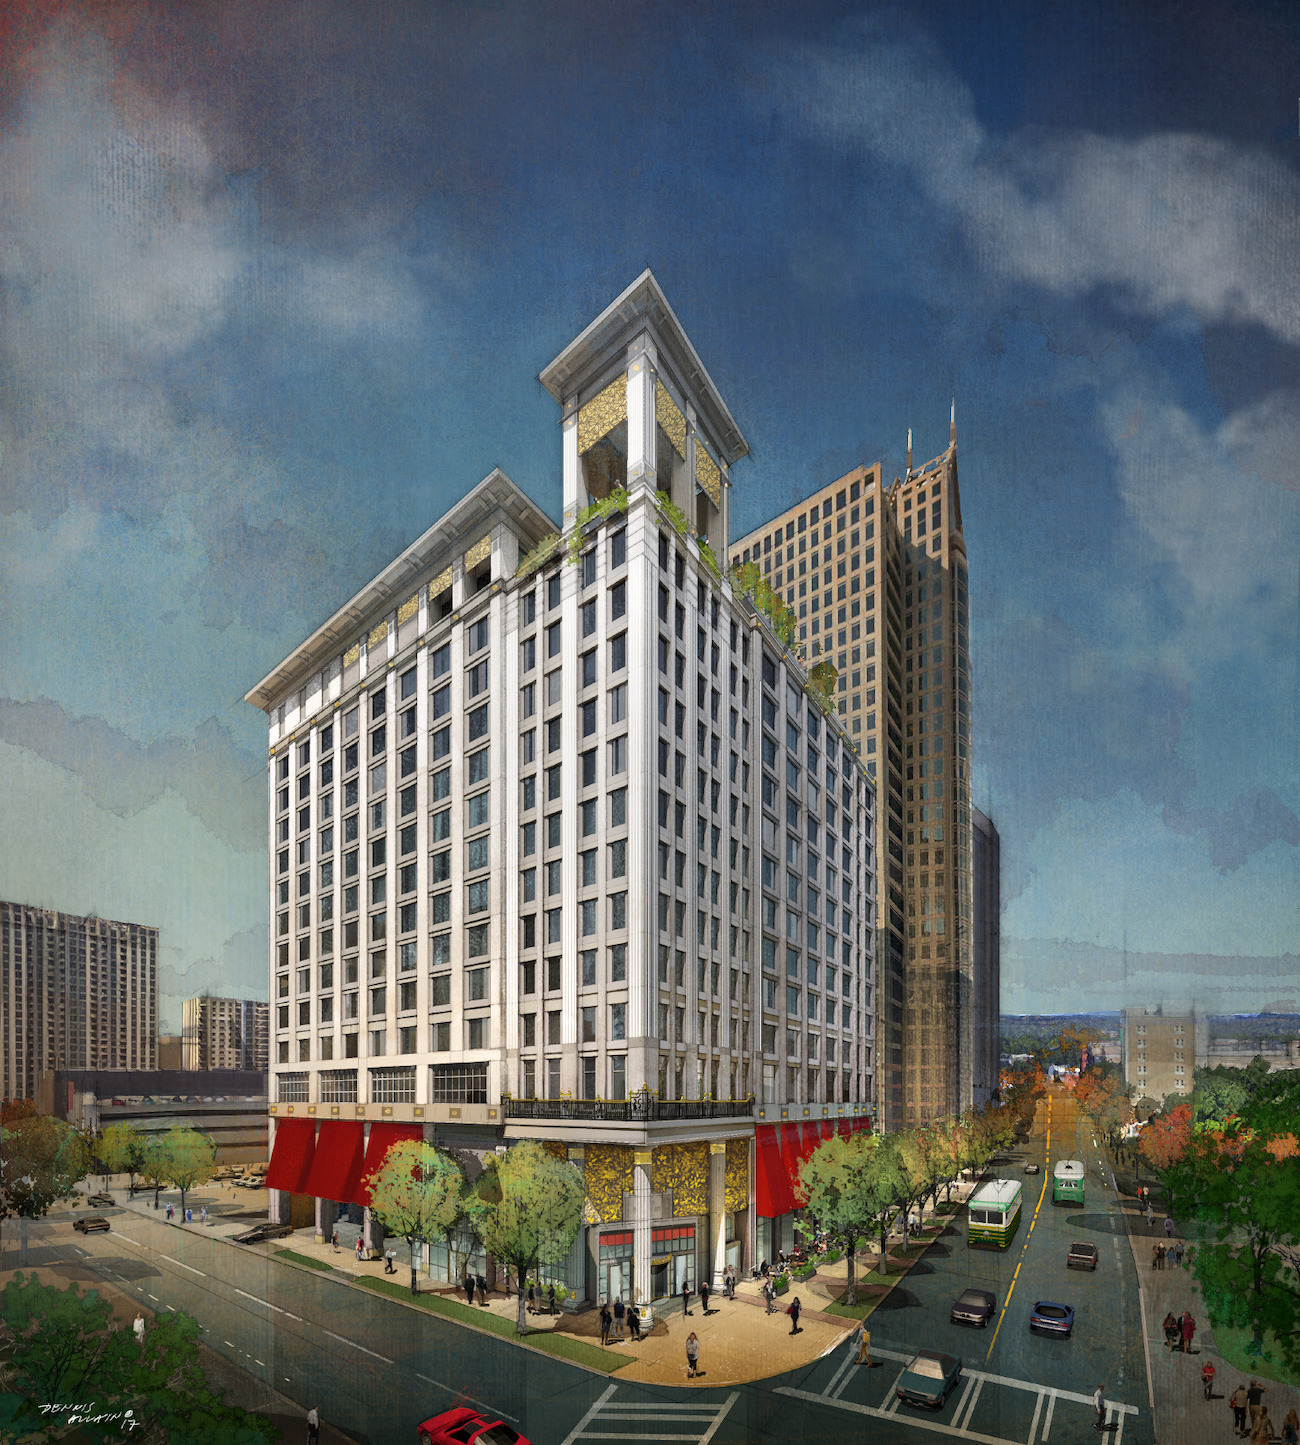 CHARLOTTE FIVE – Grand Bohemian Charlotte Tops Out Adding to Luxe Hotel Market